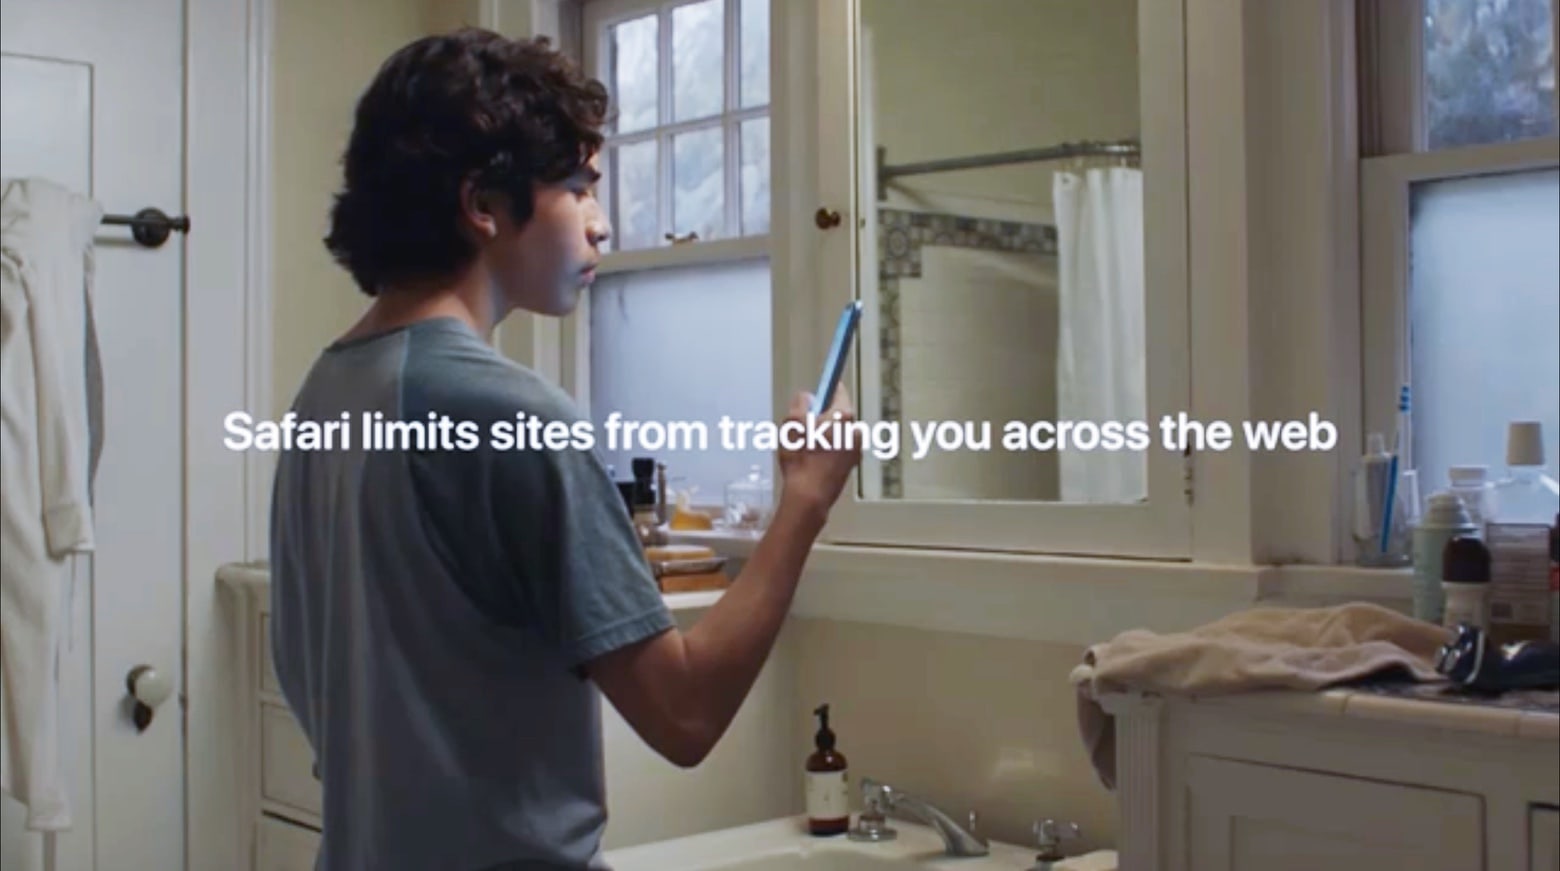 The Safari web browser won’t let sites track you